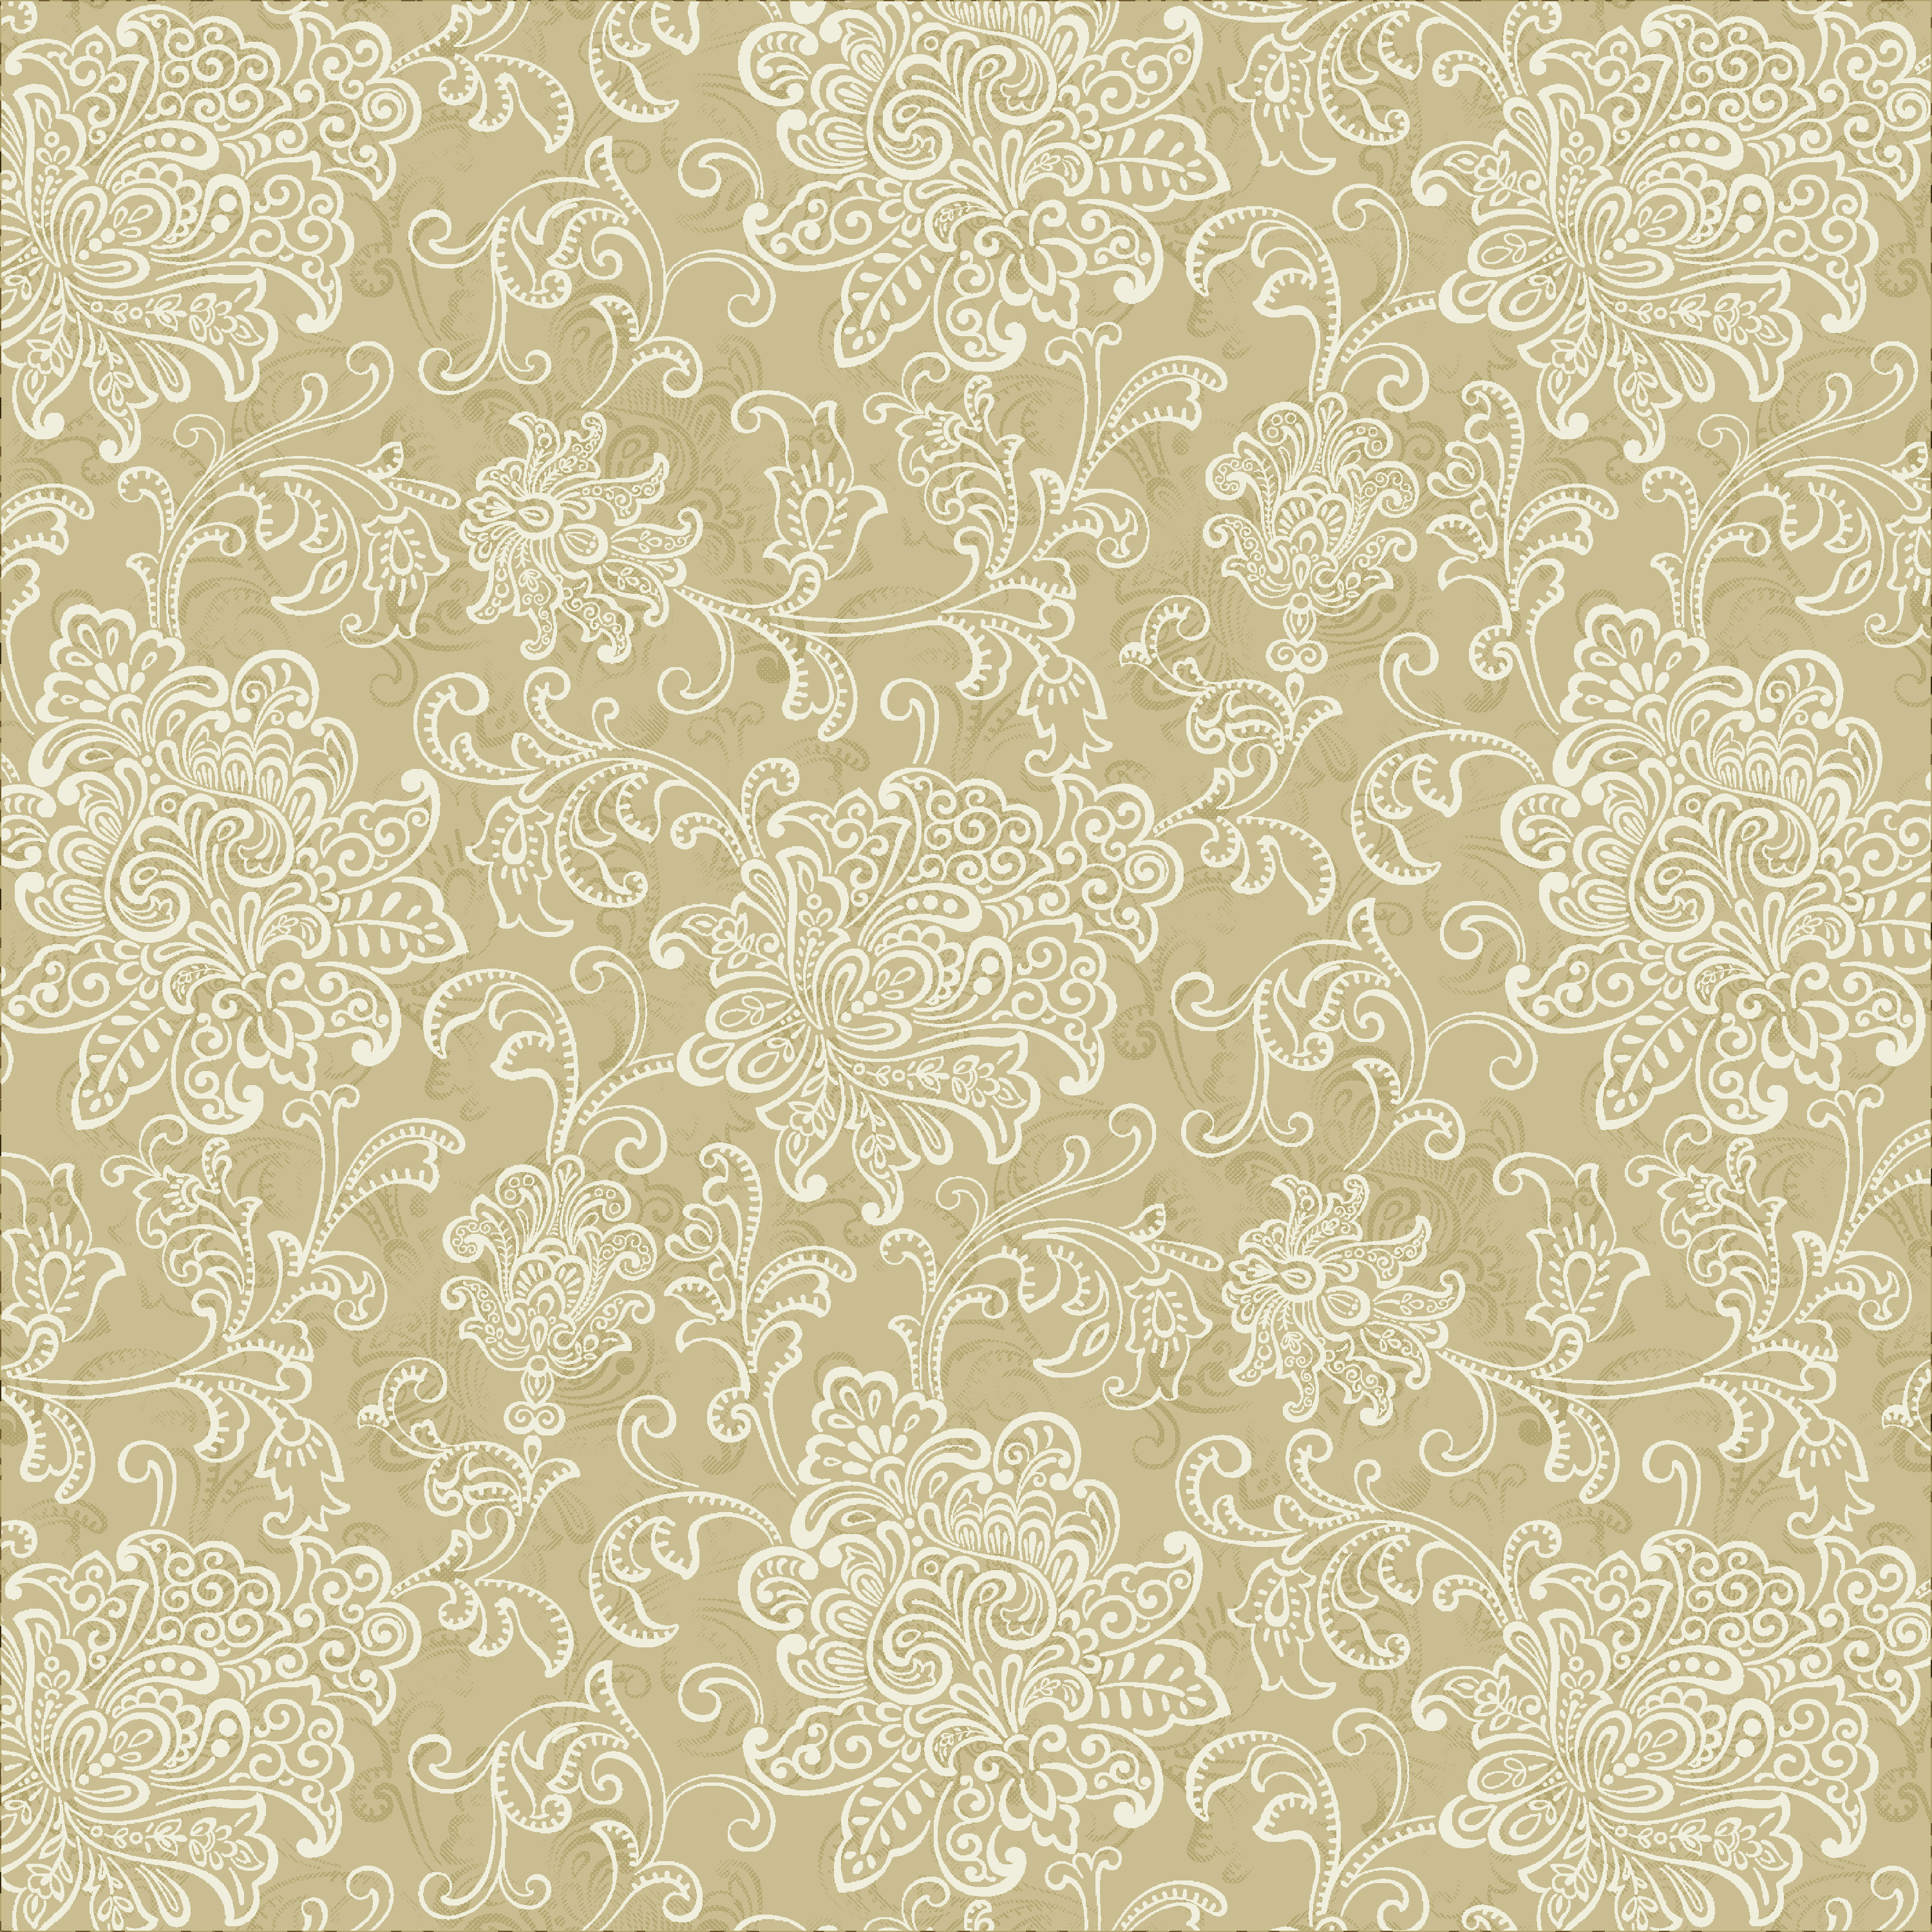 Waverly Inspirations 100% Cotton Duck 45" Width Scroll Chai Color Sewing Fabric by the Yard